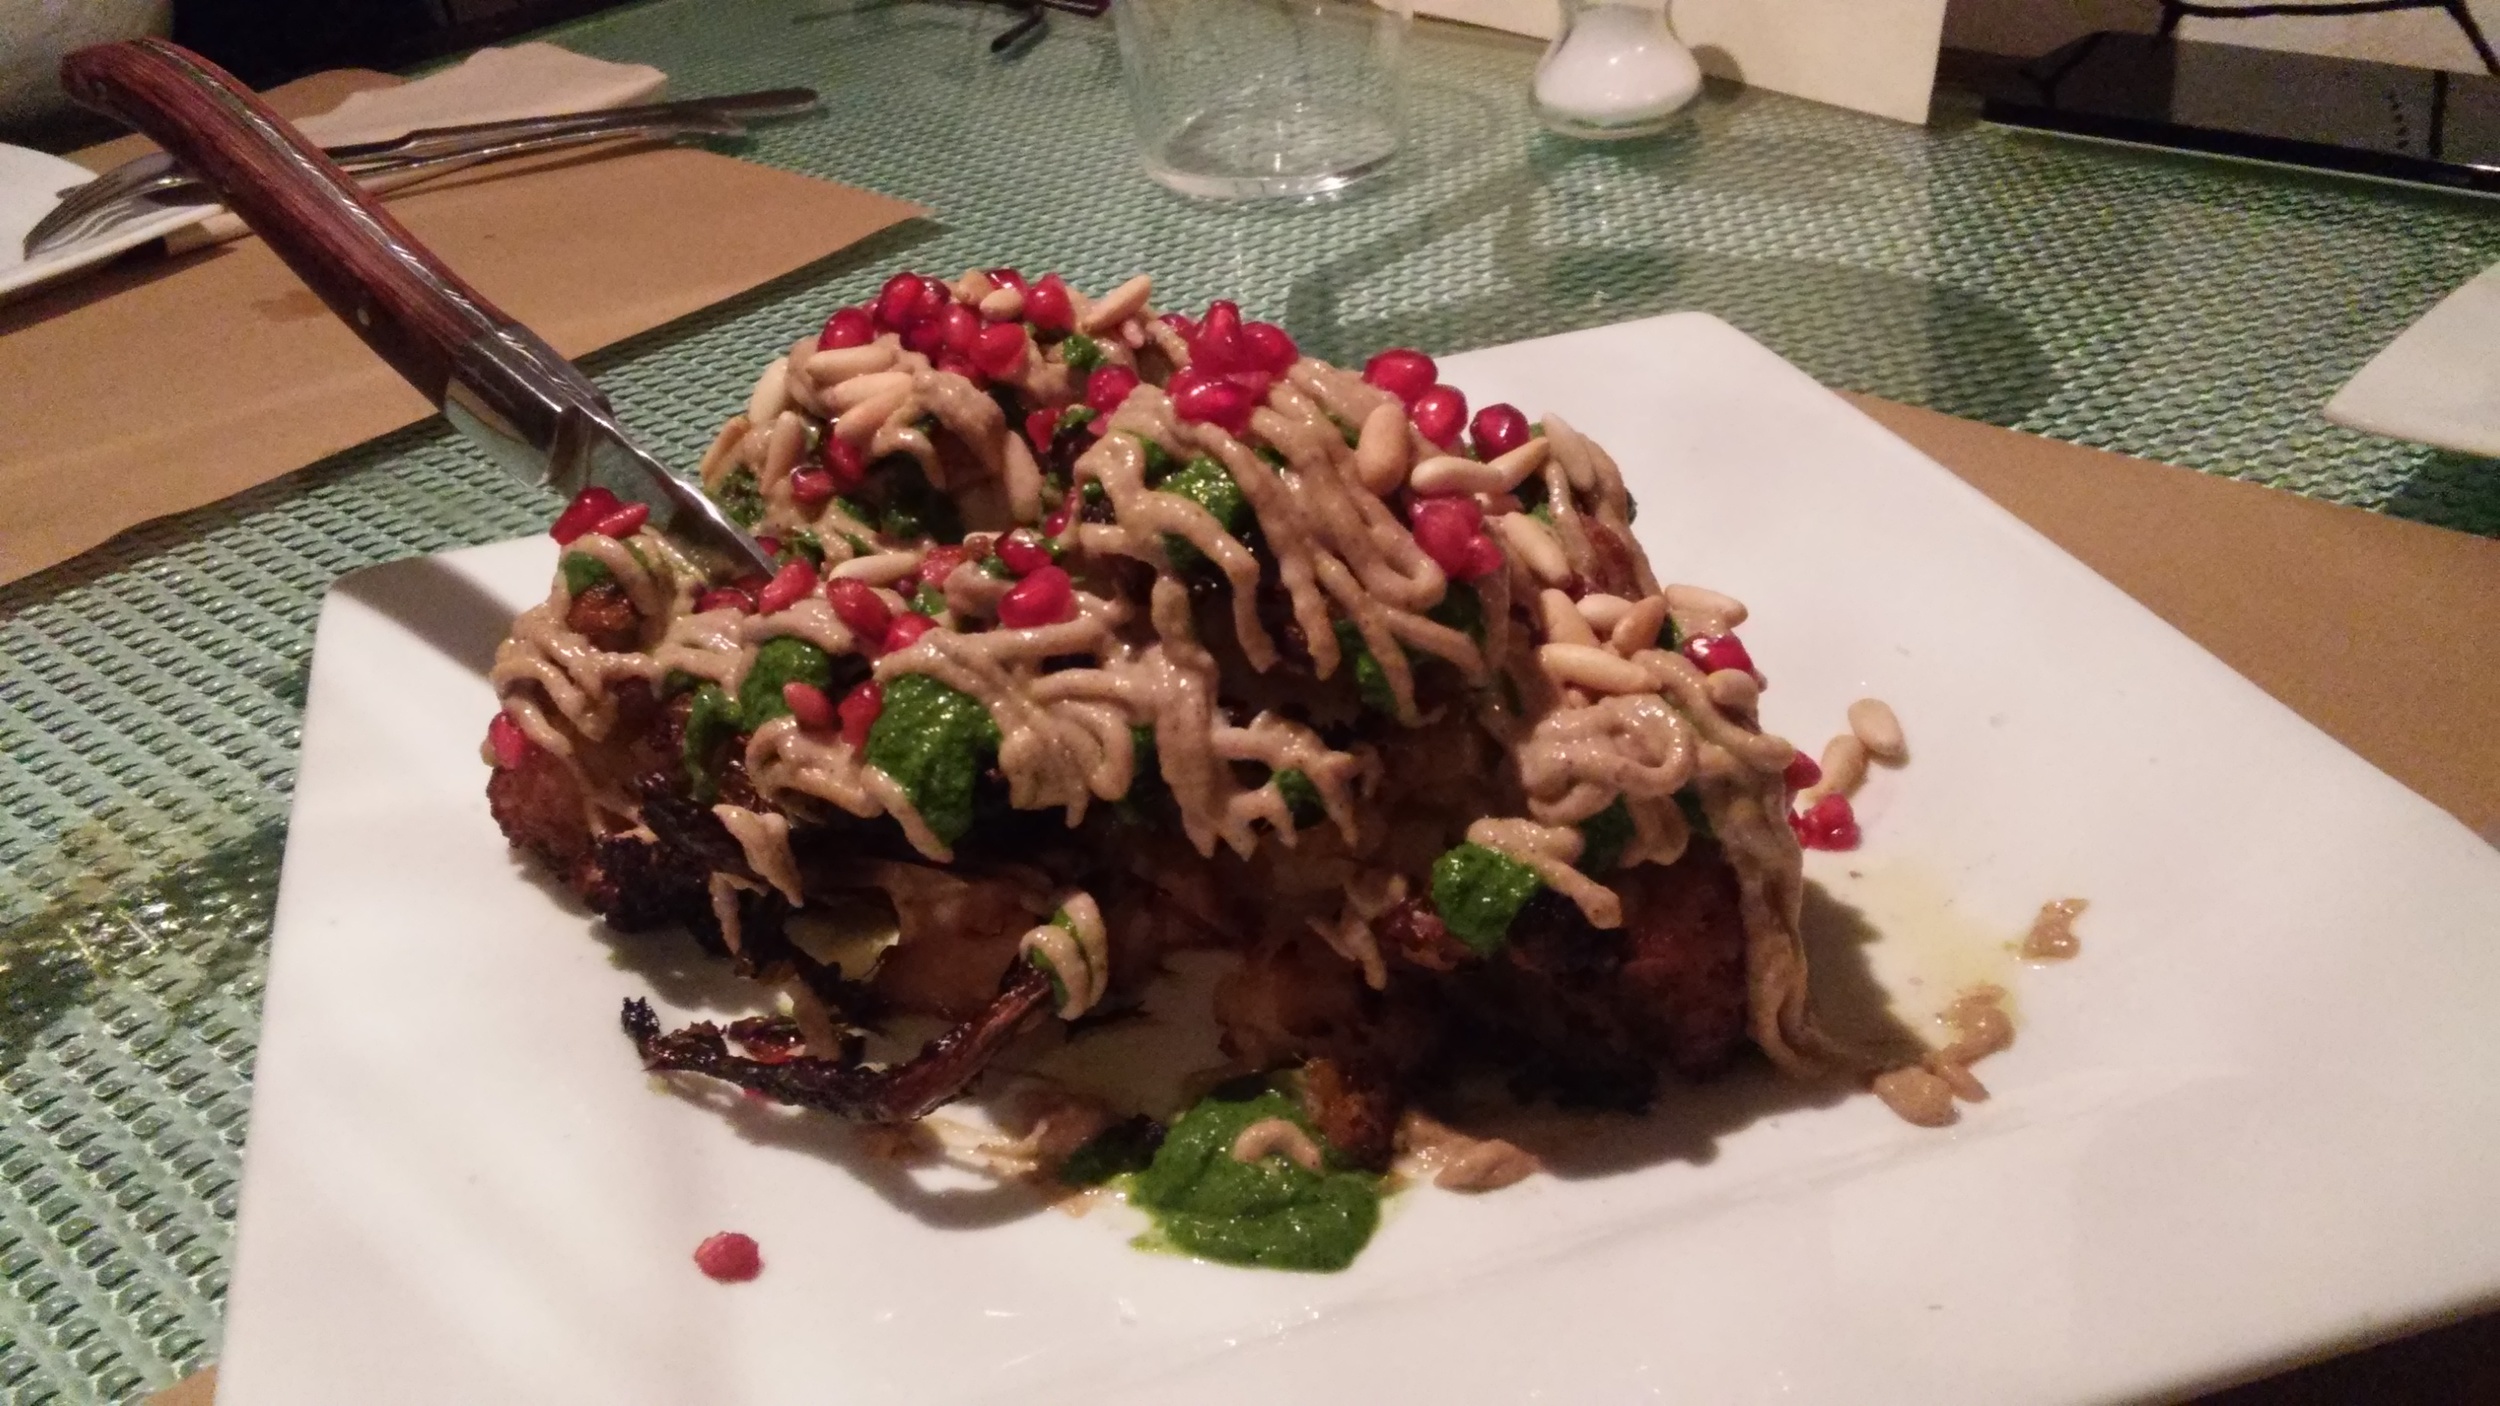 Baked cauliflower with tahini sauce, coriander, green chilli sauce, pine nuts and pomegranate